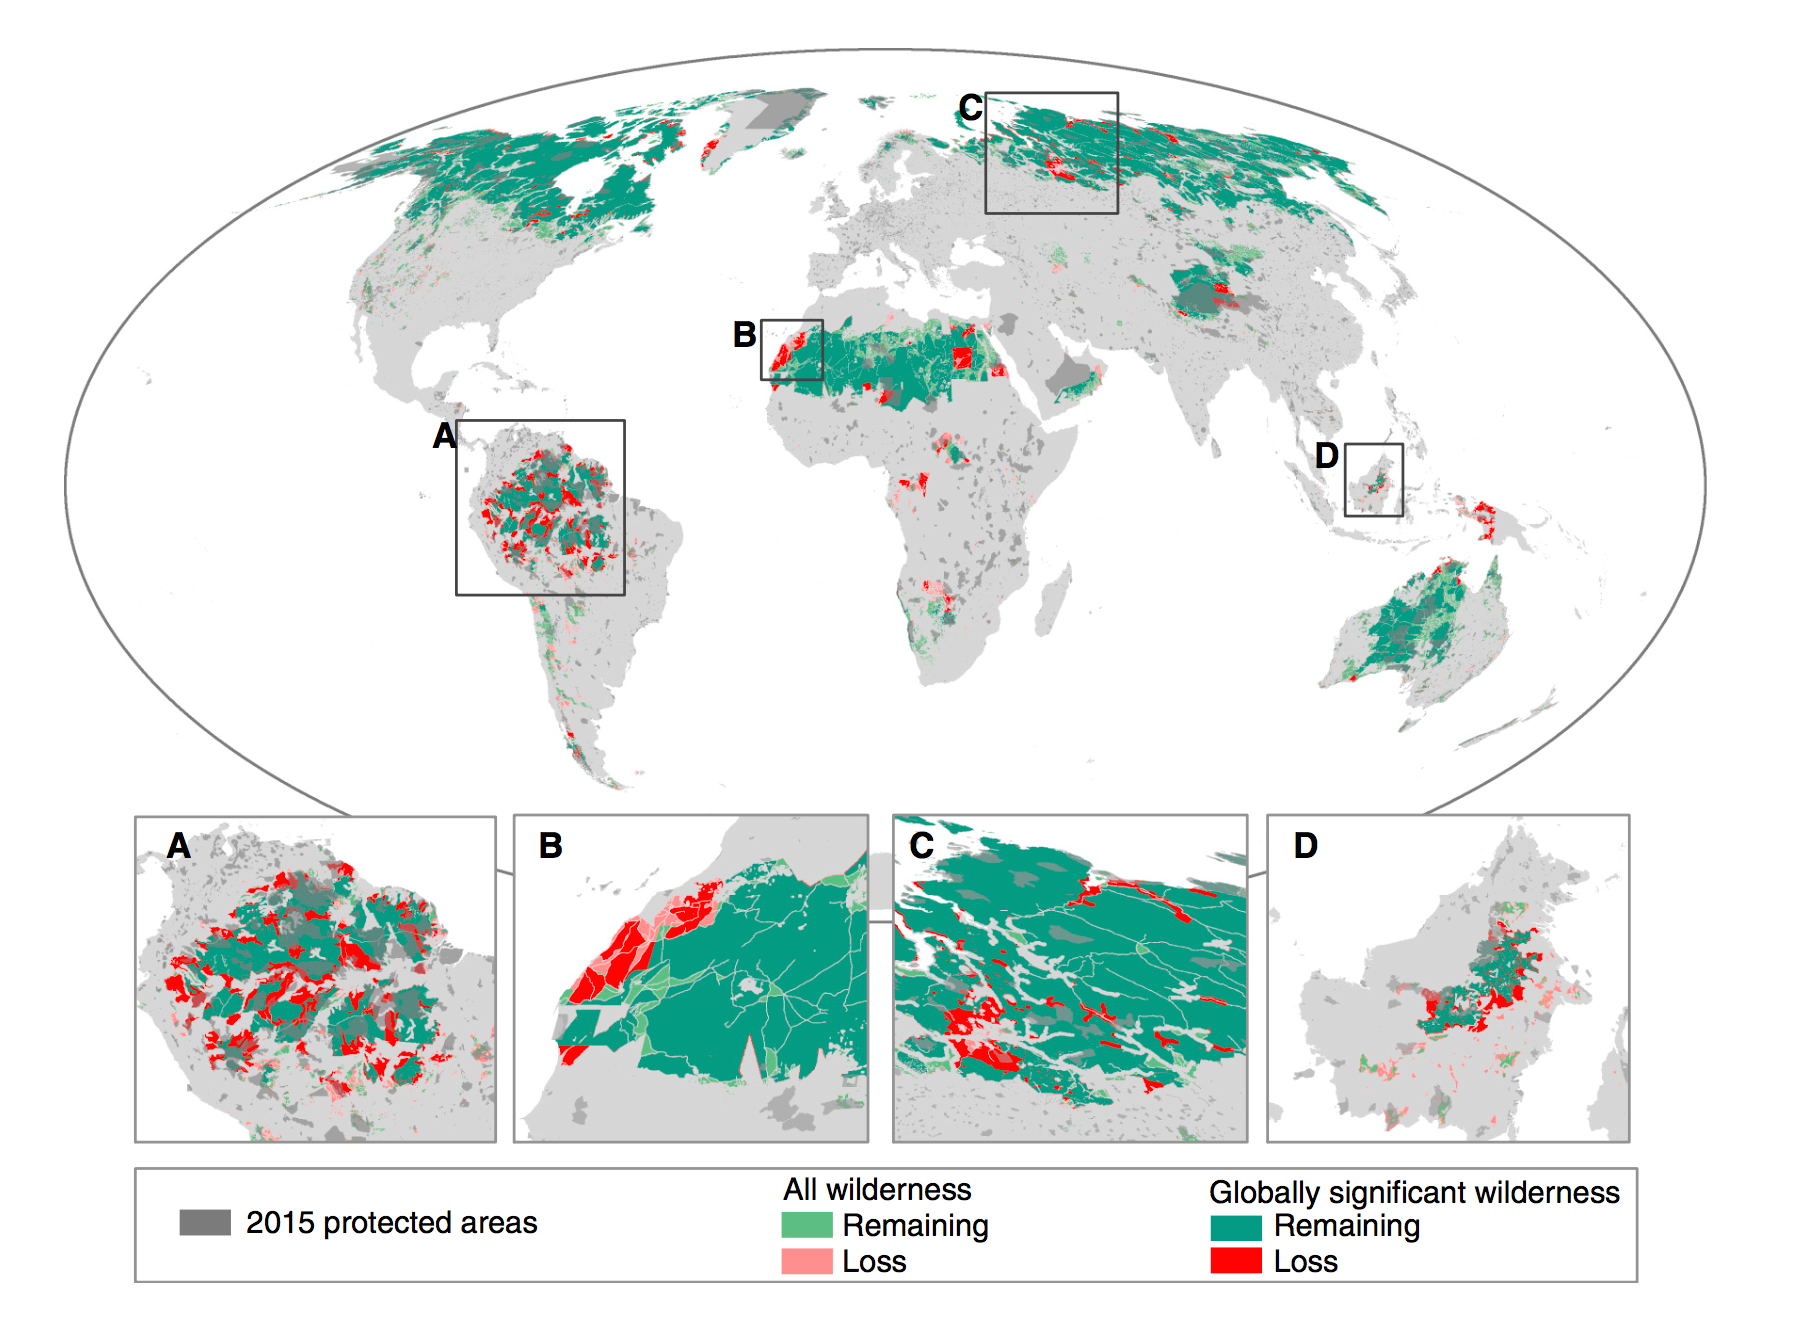 Change in the distribution of wilderness and globally significant wilderness areas since the early 1990s. Figure © Watson, et al. (2016). Current Biology, 26, 1-6.